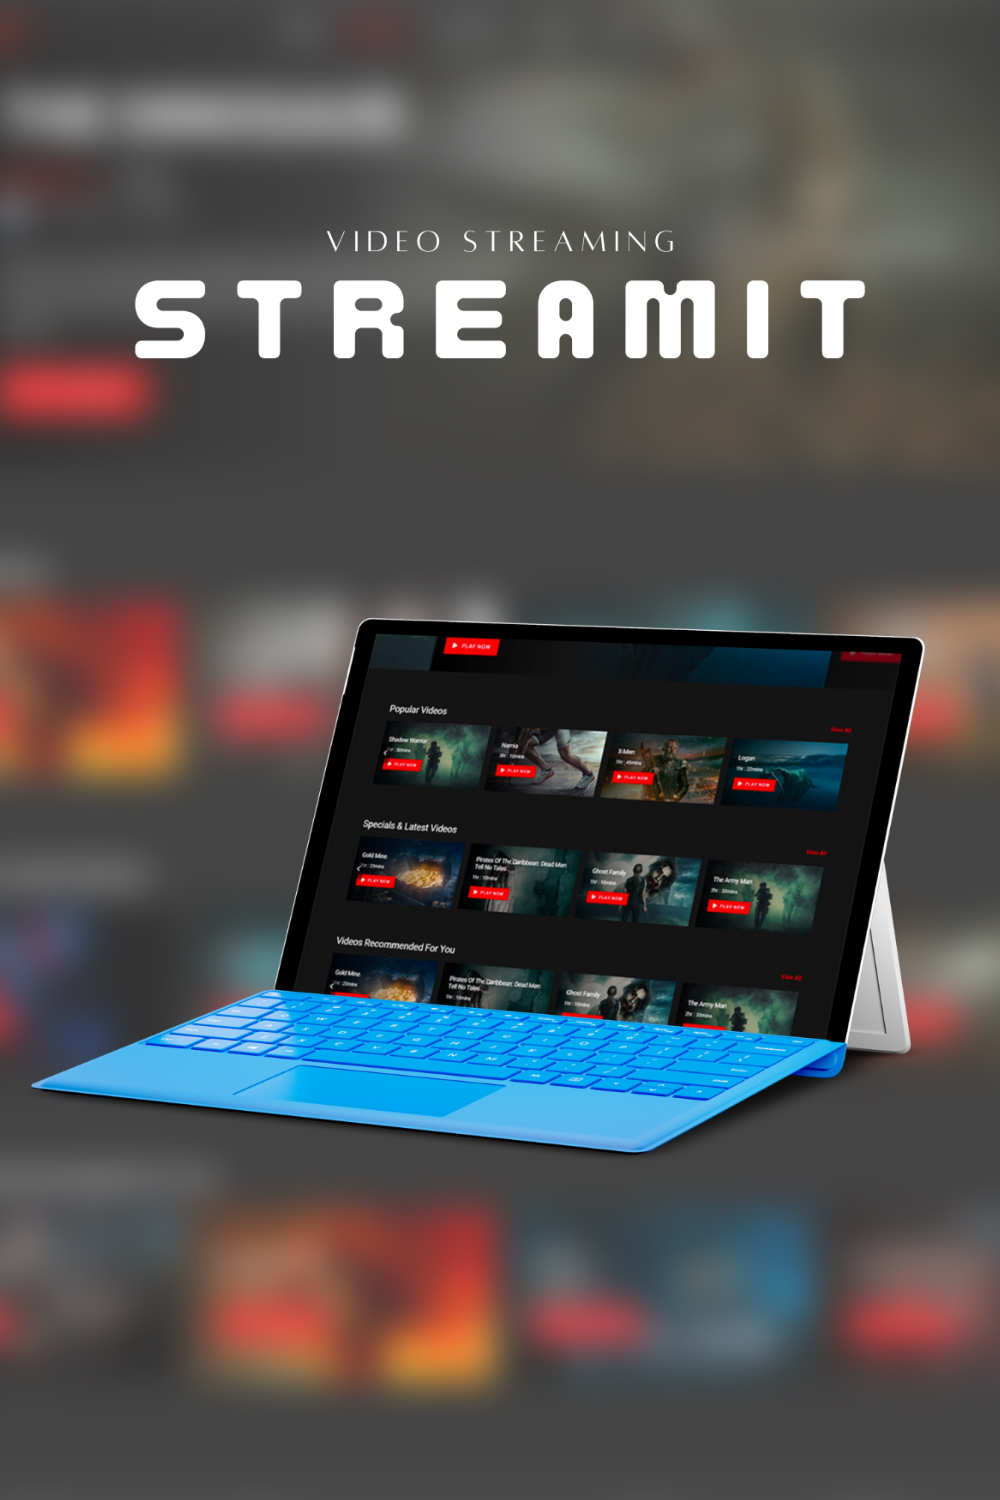 Page image of the charming Streamit theme for video streaming sites on a tablet screen.